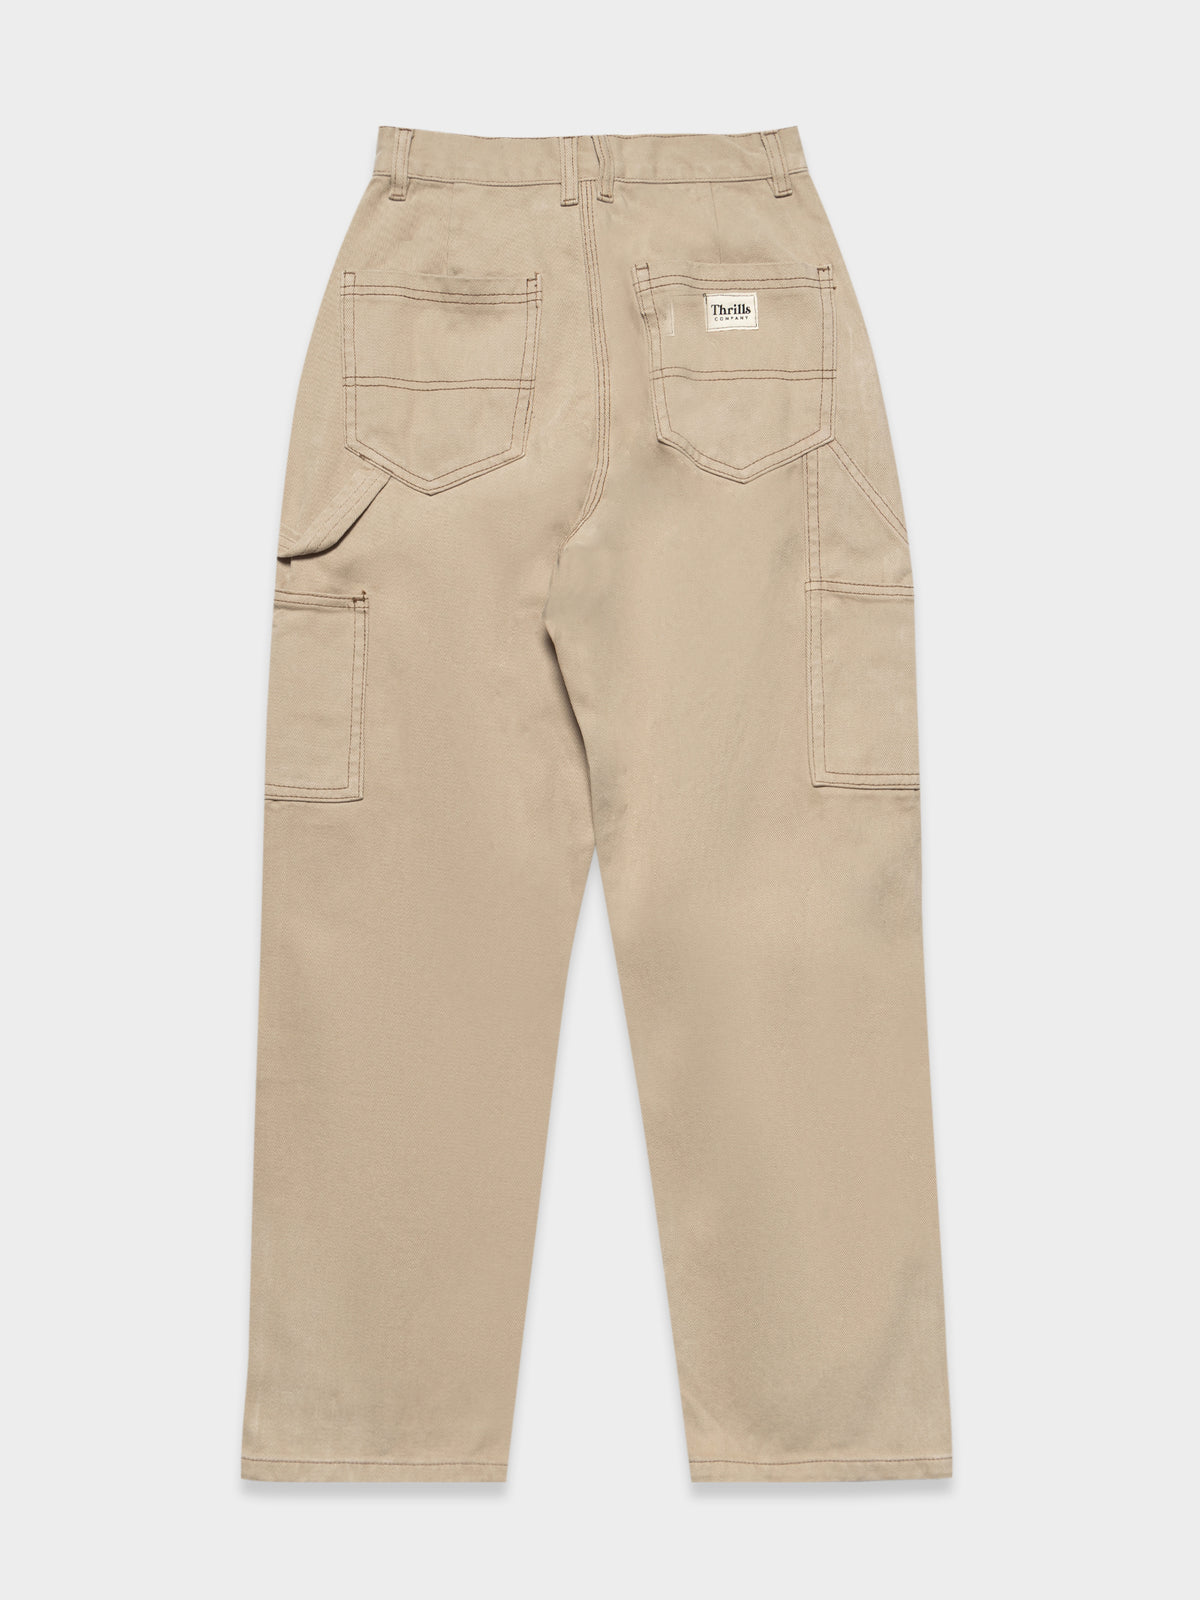 Carpenter Drill Pants in Aged Tan